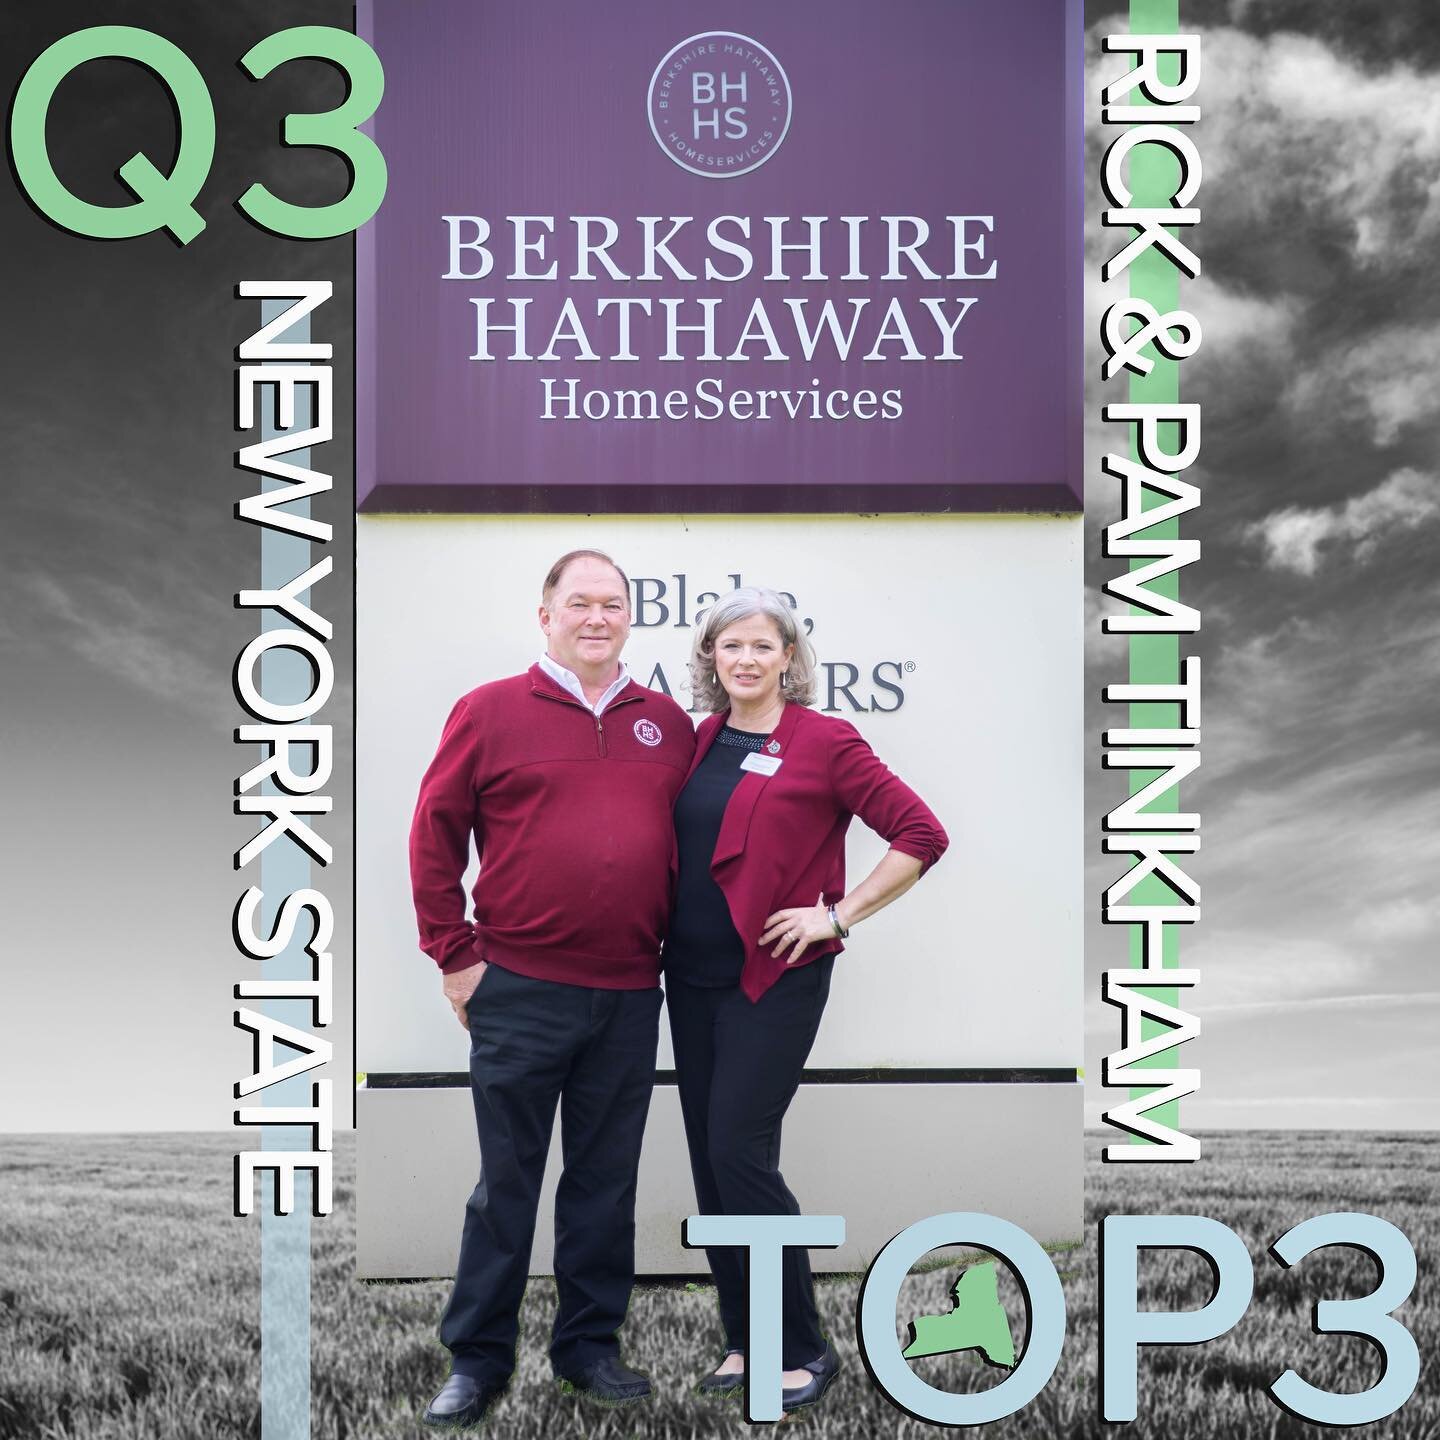 Congratulations to Rick and Pam Tinkham for achieving #3 Berkshire Hathaway HomeServices team in all of New York State (residential units) for Q3! This is the 2nd consecutive quarter that &ldquo;Team Tinkham&rdquo; has achieved this recognition. #ber